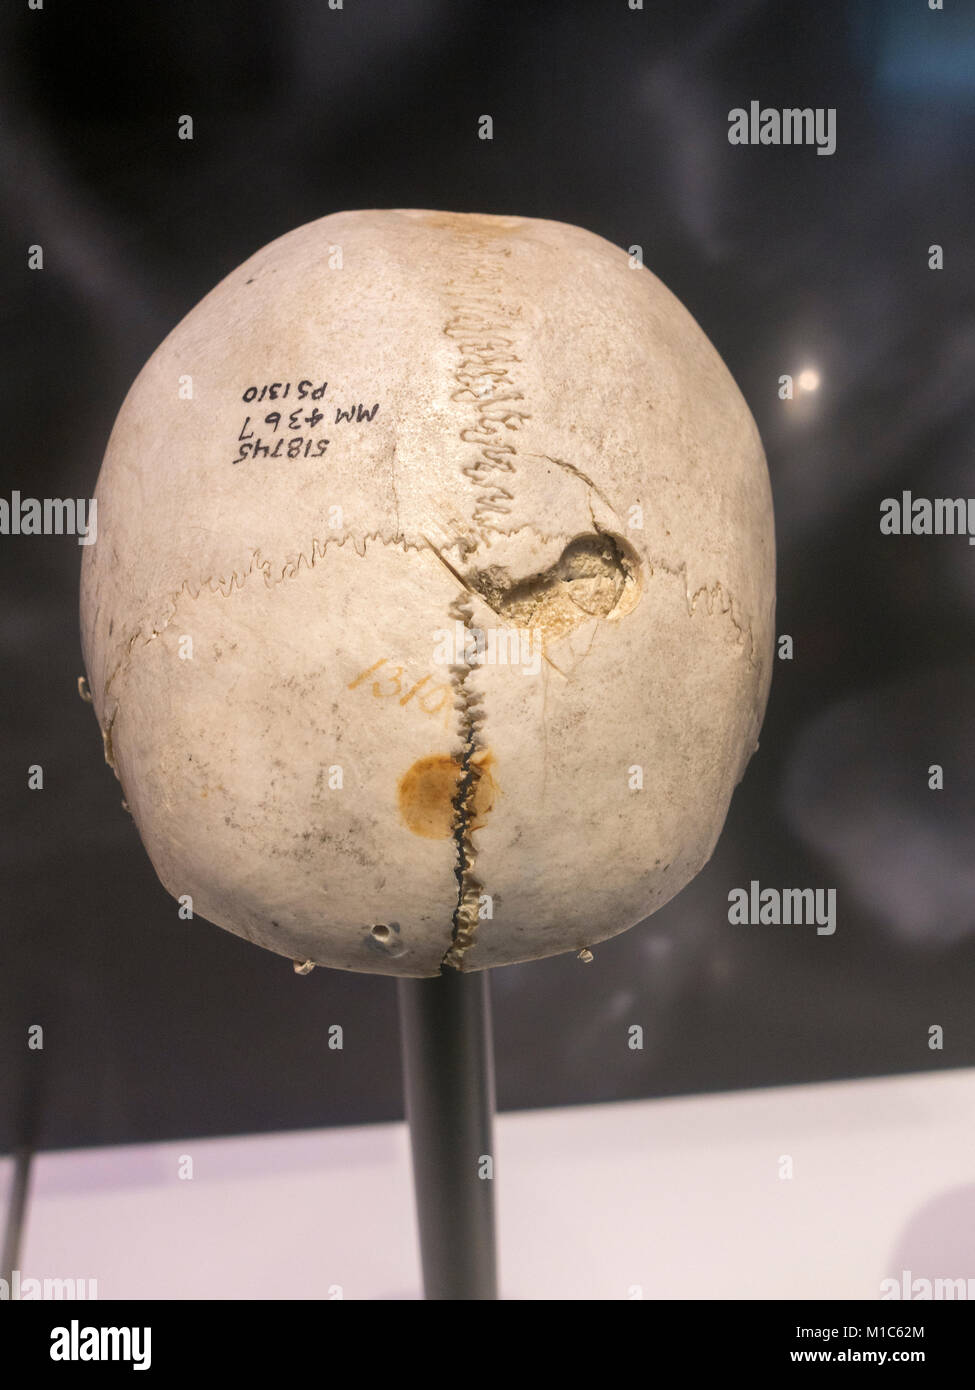 Cranial trephination from the Civil War era on display in the National Museum of Health and Medicine, Silver Spring, MD, USA. Stock Photo